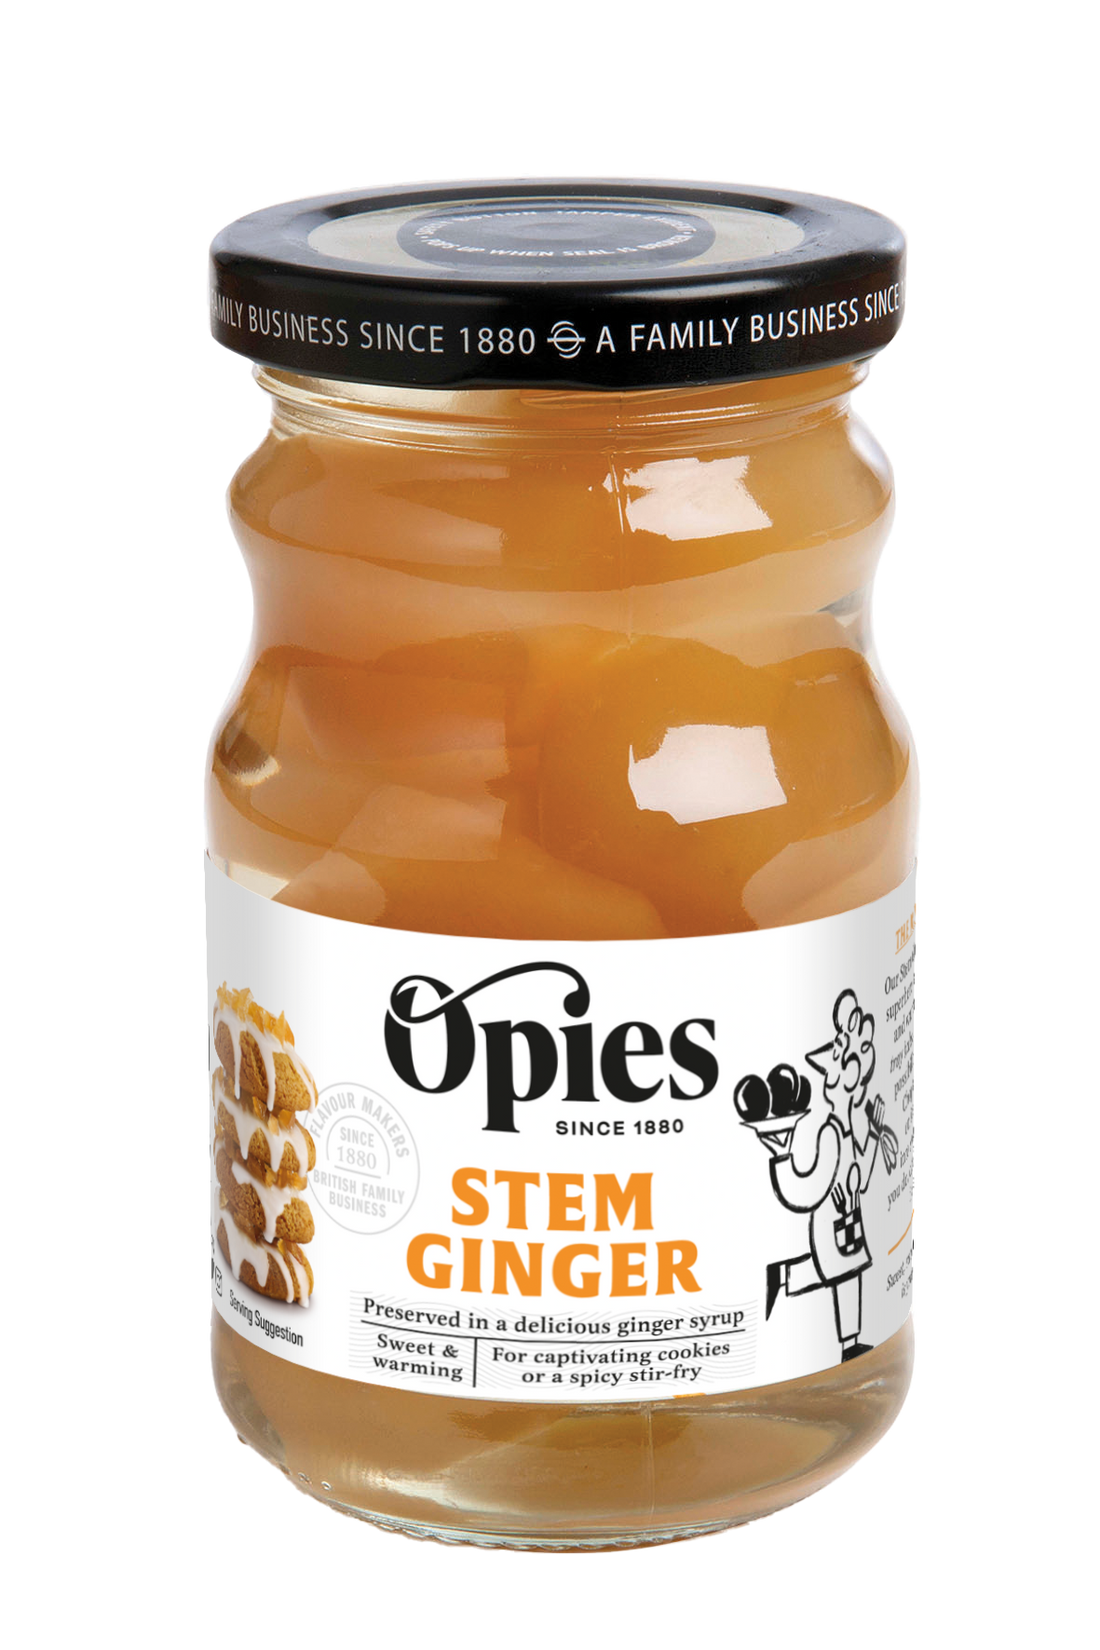 Opies Stem Ginger In Syrup